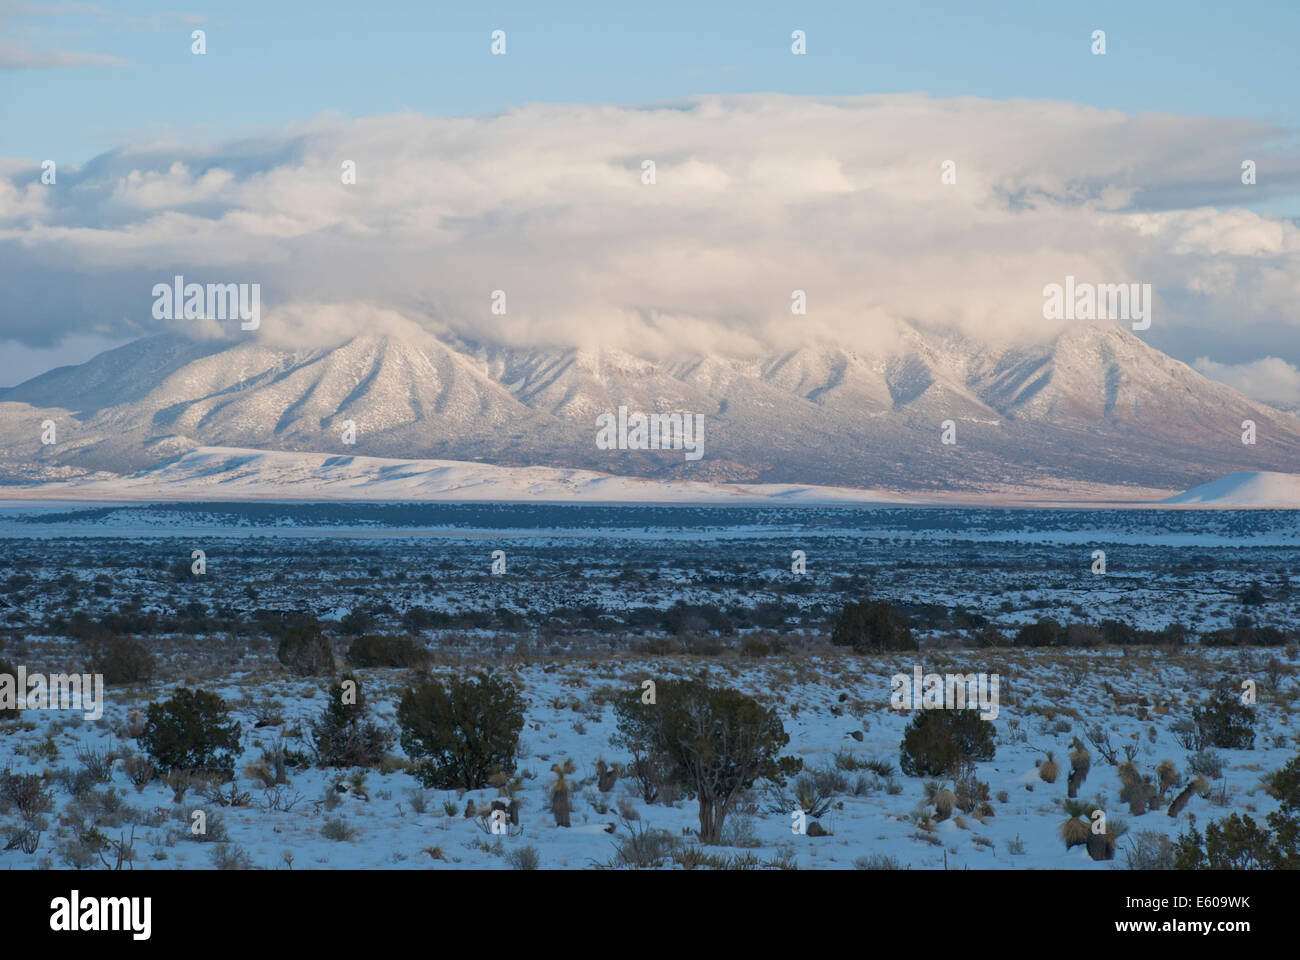 The Carrizo Mountains draped in clouds and covered with snow. Stock Photo